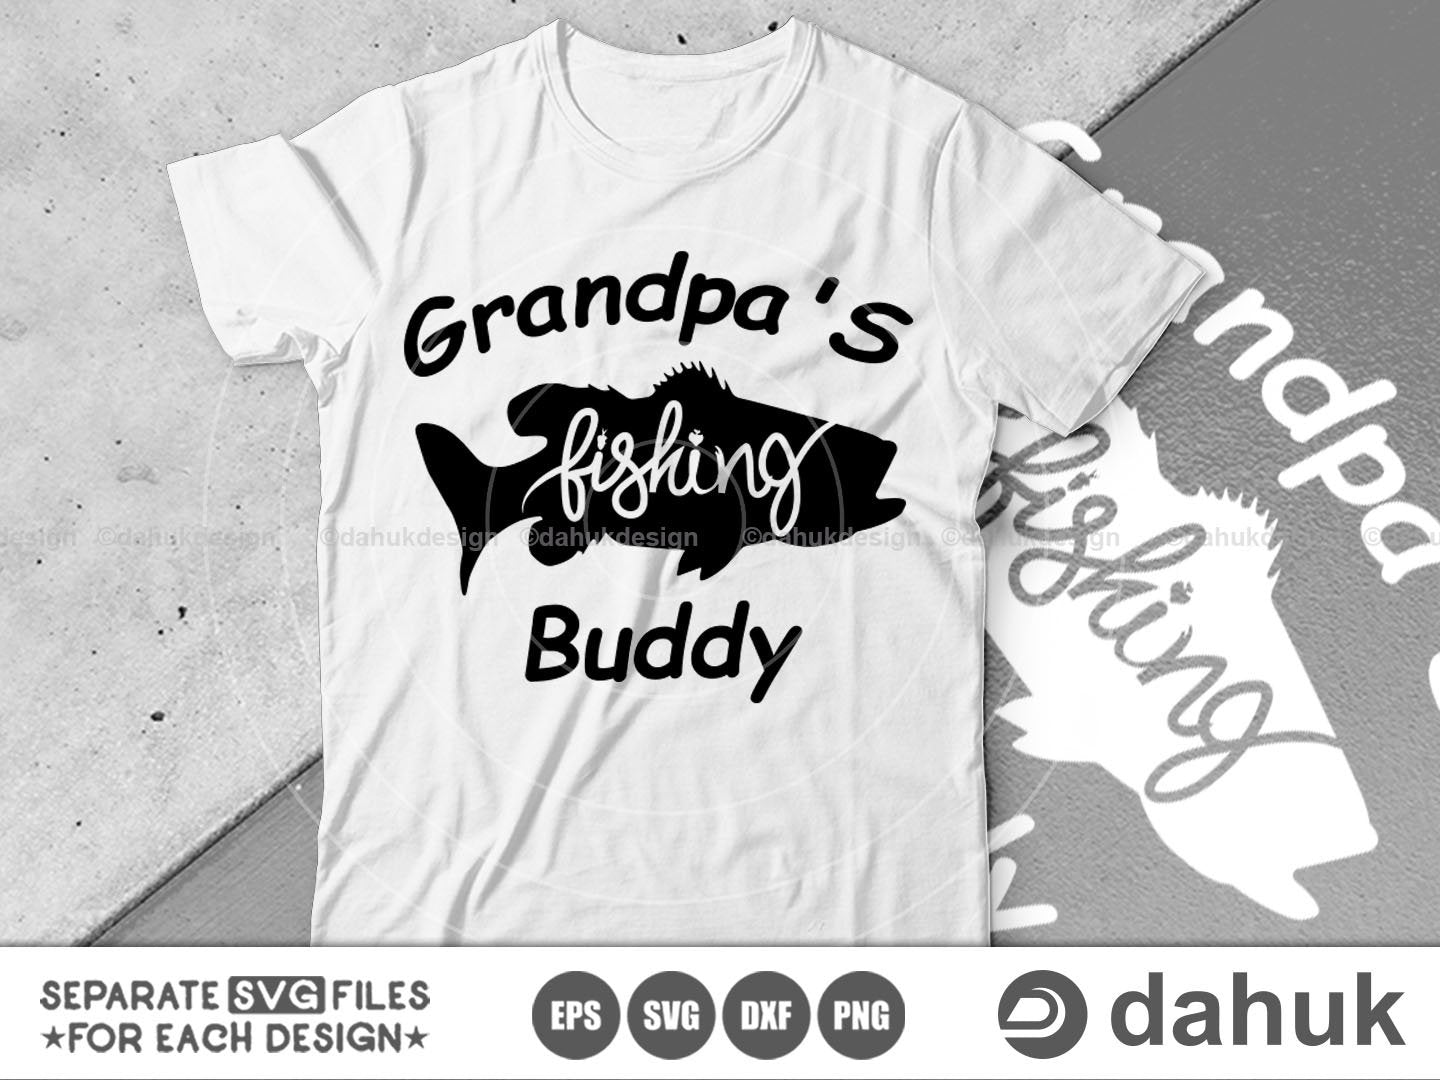 Download Craft Supplies Tools Daddy S Fishing Buddies Svg Diy Shirt Svg Jpg Dxf Eps Png Files Cutting File Fishing Father Gift Dad Cricut Silhouette Cut File Fishing Rod Templates